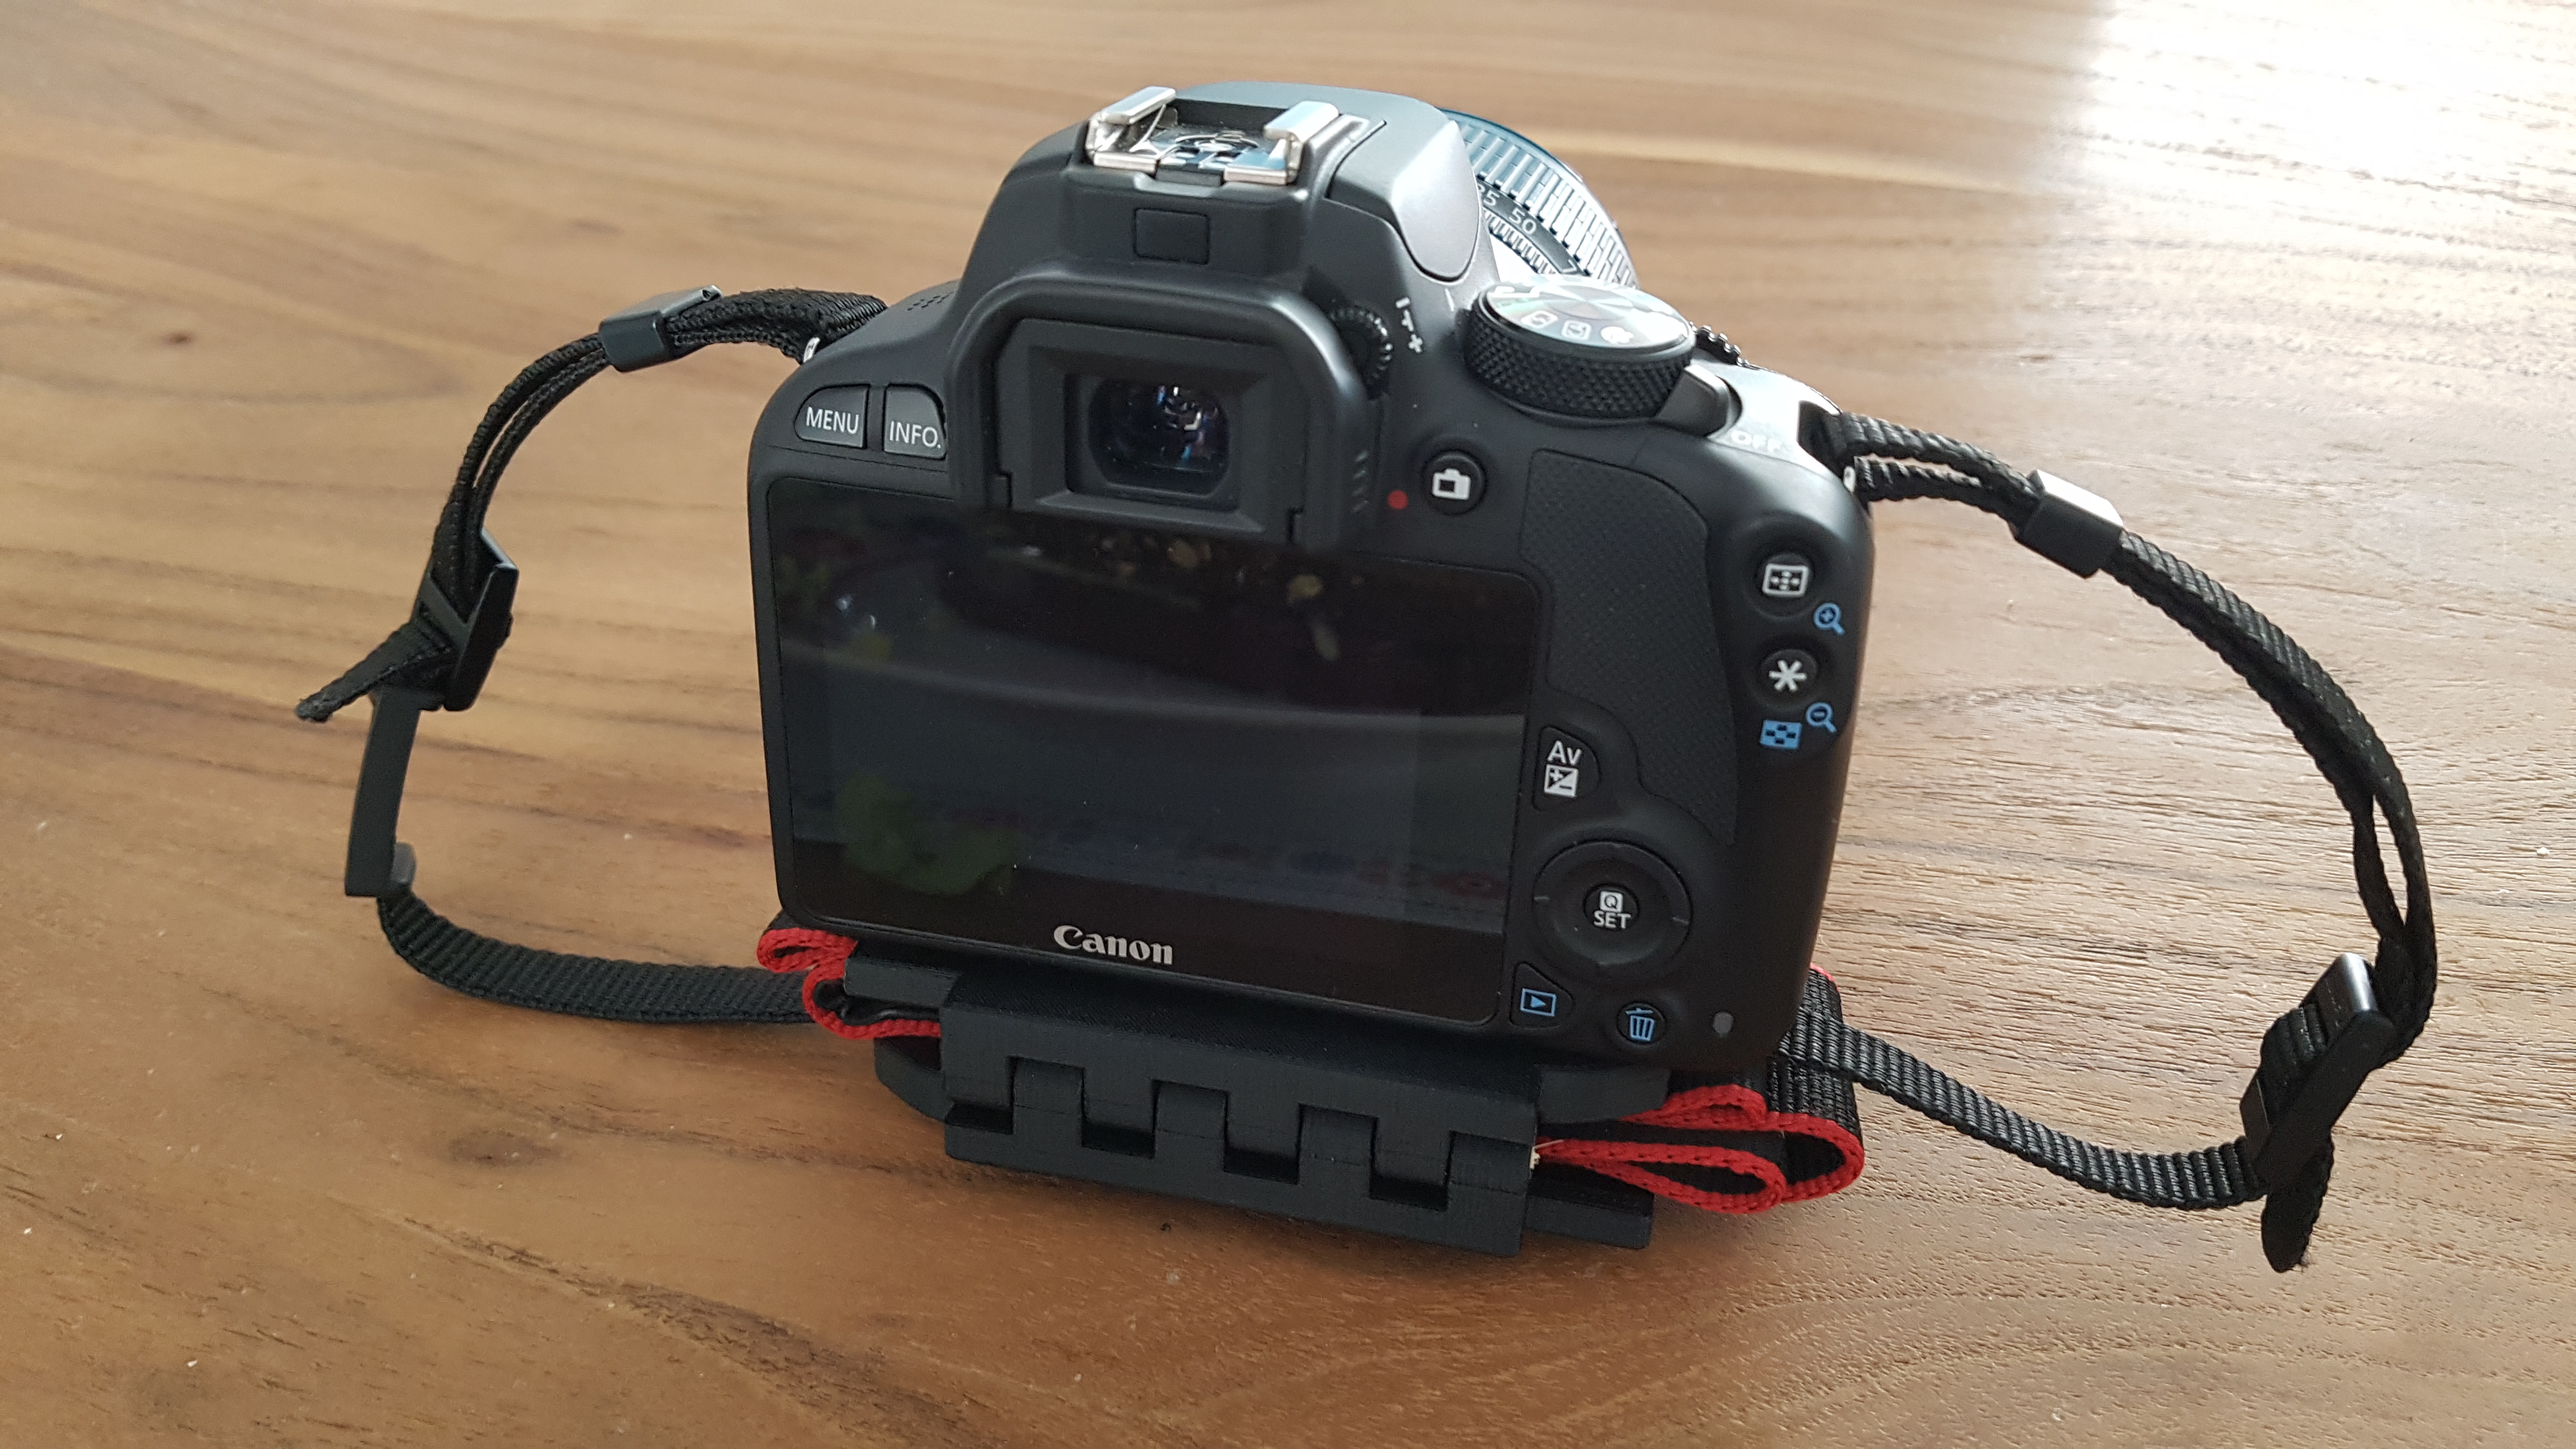 Canon Strap Clamp 100d and 550d + Nikon D5300